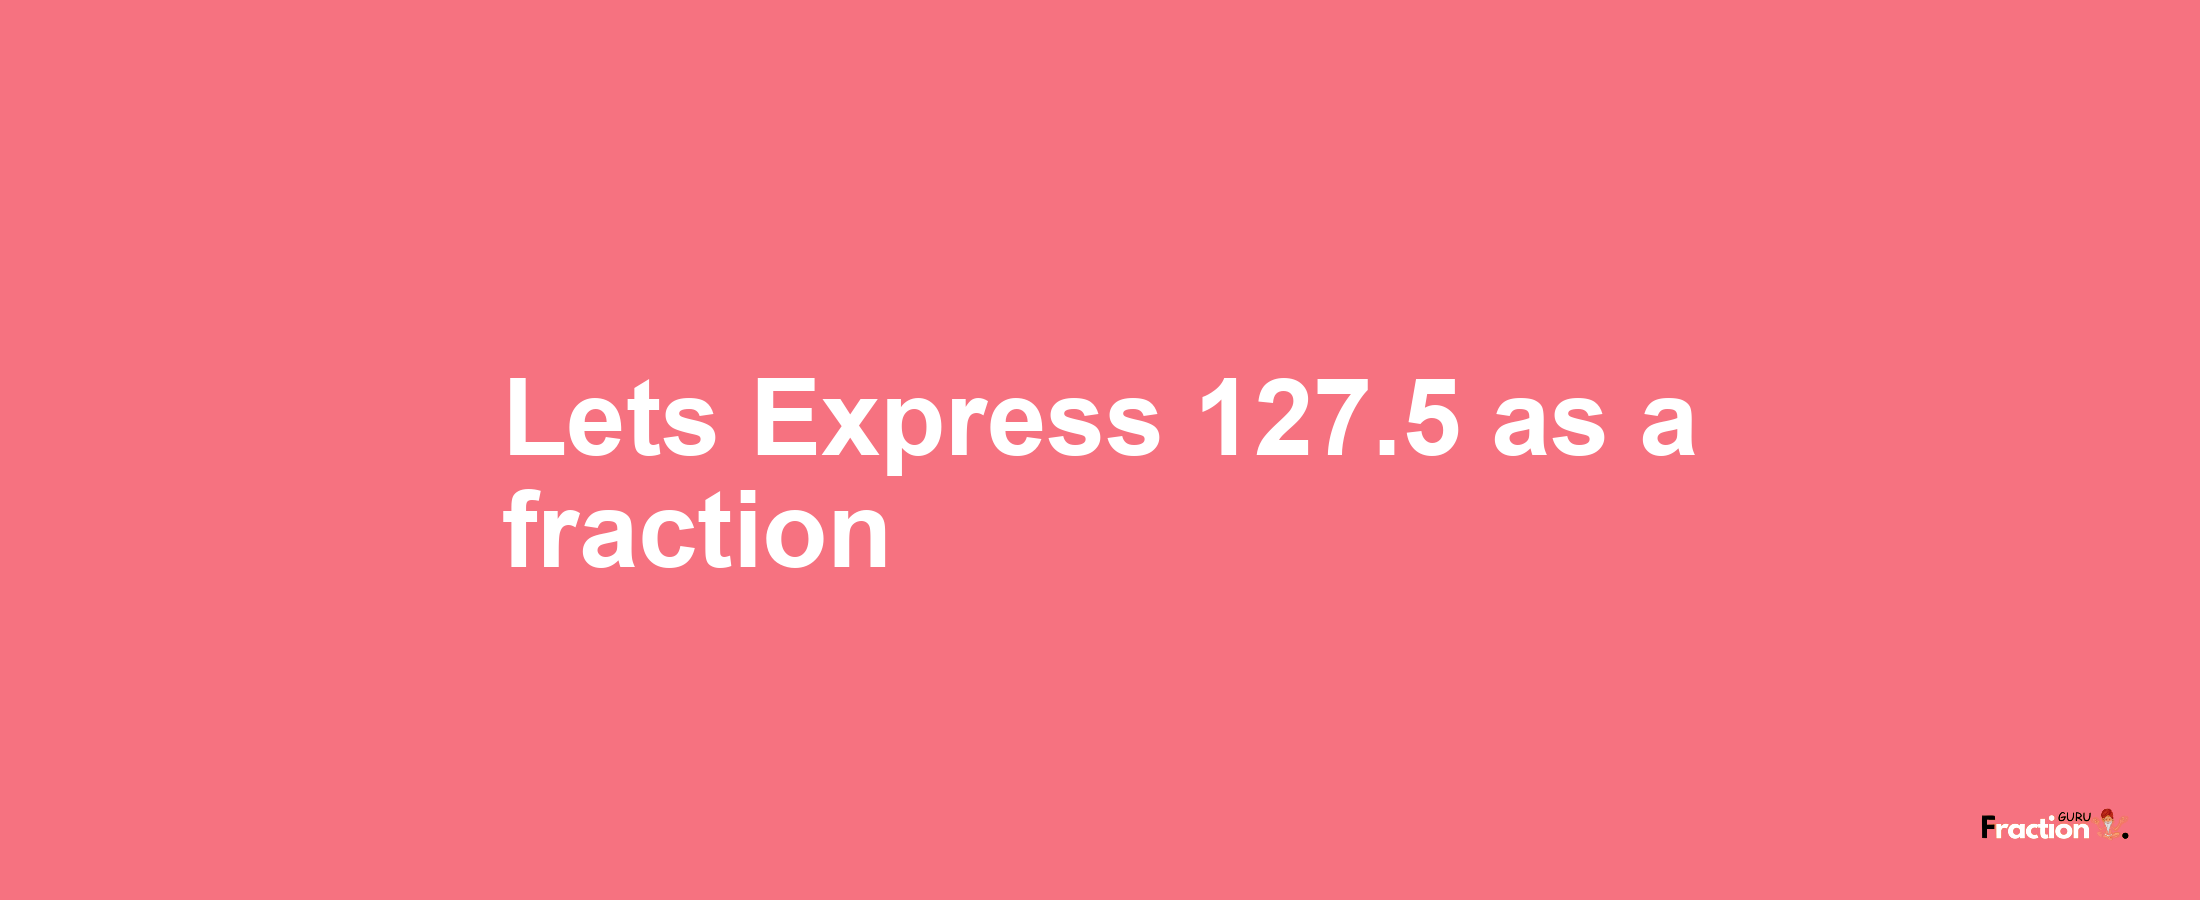 Lets Express 127.5 as afraction